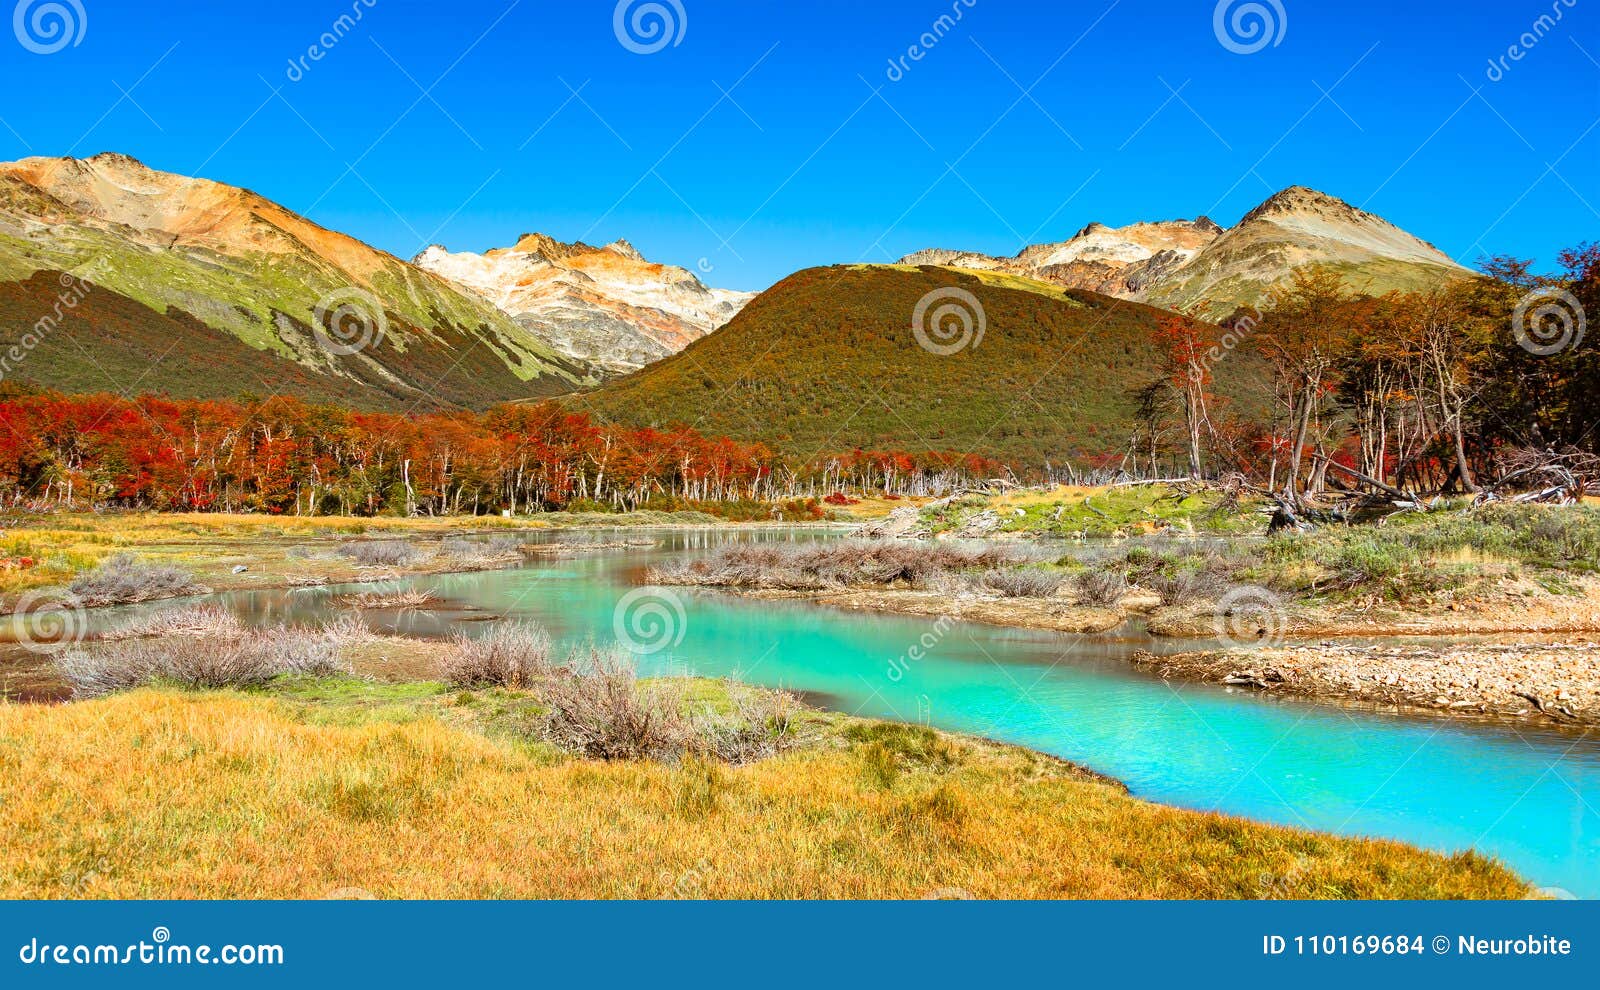 gorgeous landscape of patagonia`s tierra del fuego national park